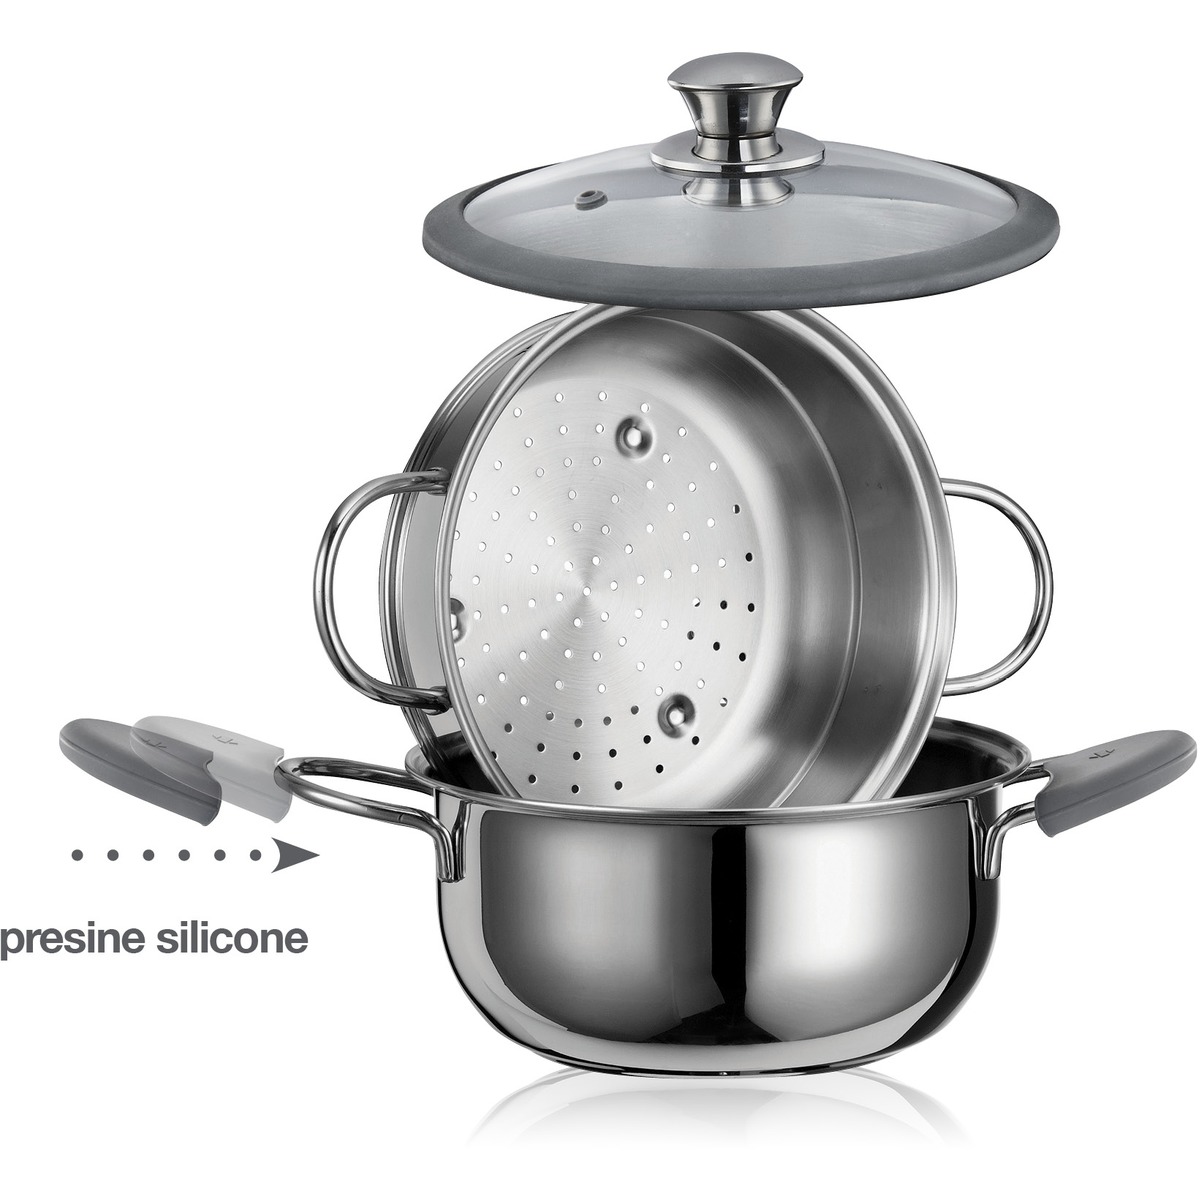 Premium Steamer Set (22cm) | Inoxriv - Cookware | Day and Age | New Zealand